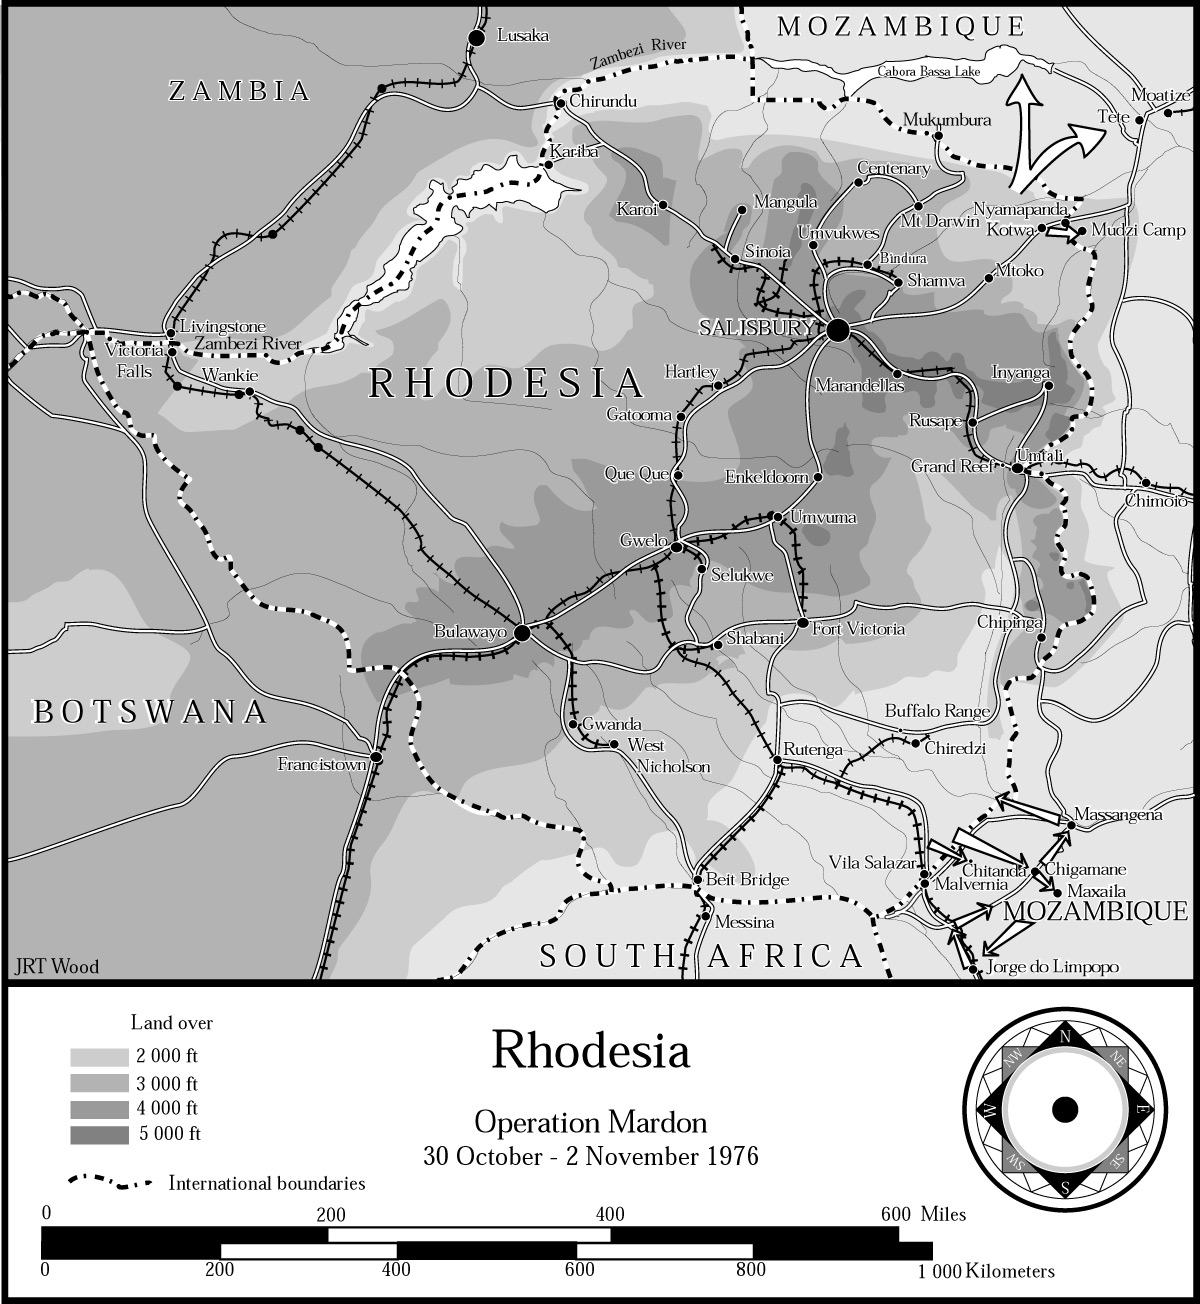 Rhodesia by Dr JRT Wood